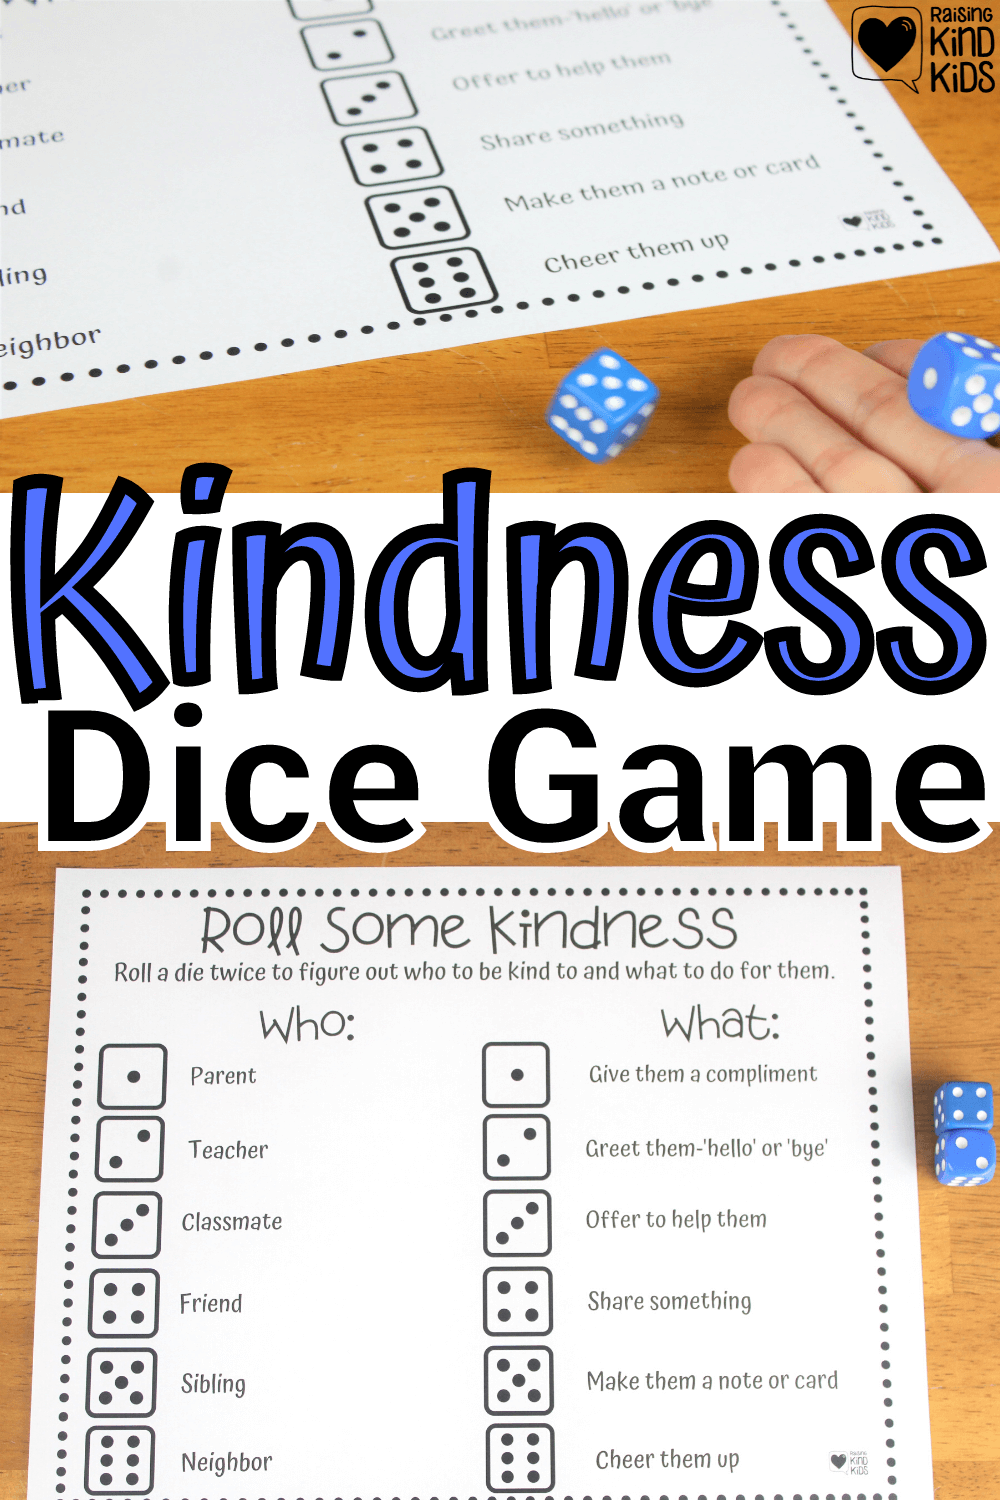 Use this kindness dice game to help kids speak and act with kindness more often. It's a fun, hands on kindness activity for kids. 